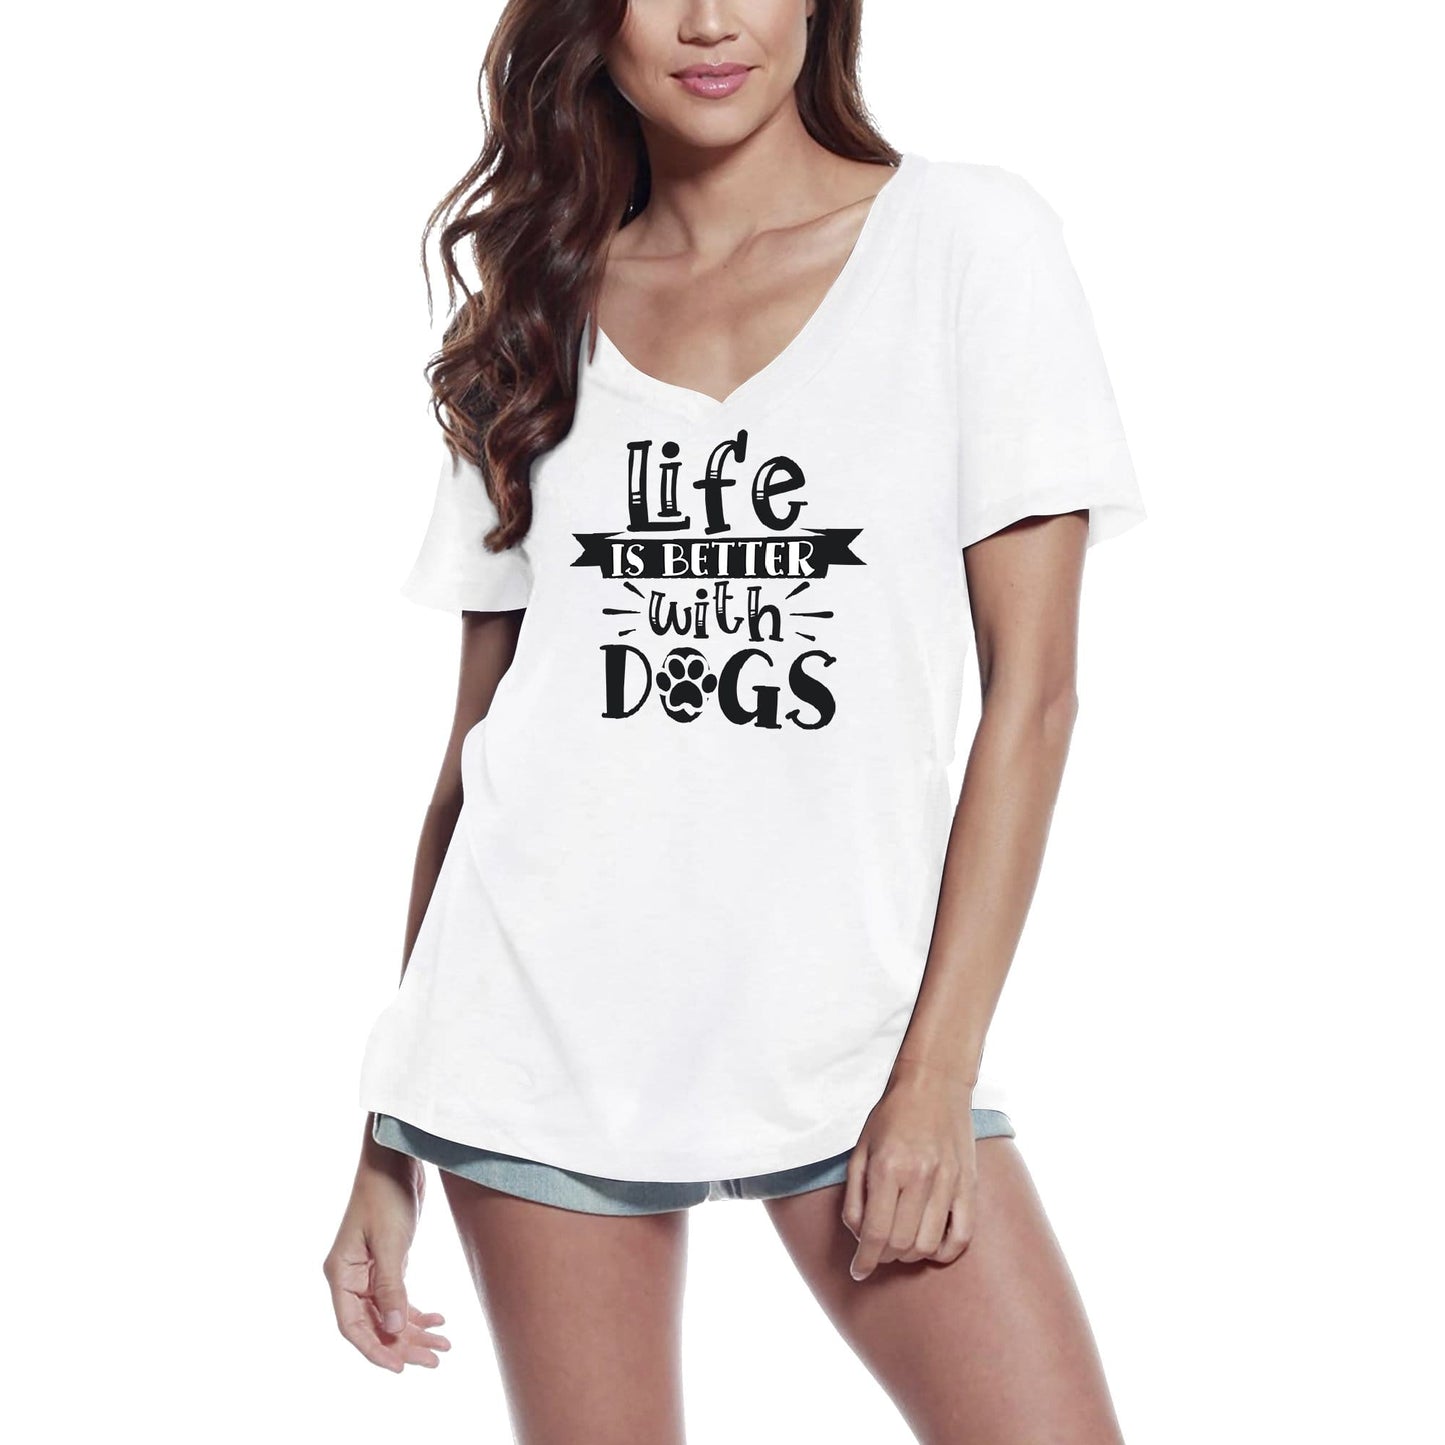 ULTRABASIC Women's T-Shirt Life Is Better With Dogs - Funny Short Sleeve Tee Shirt